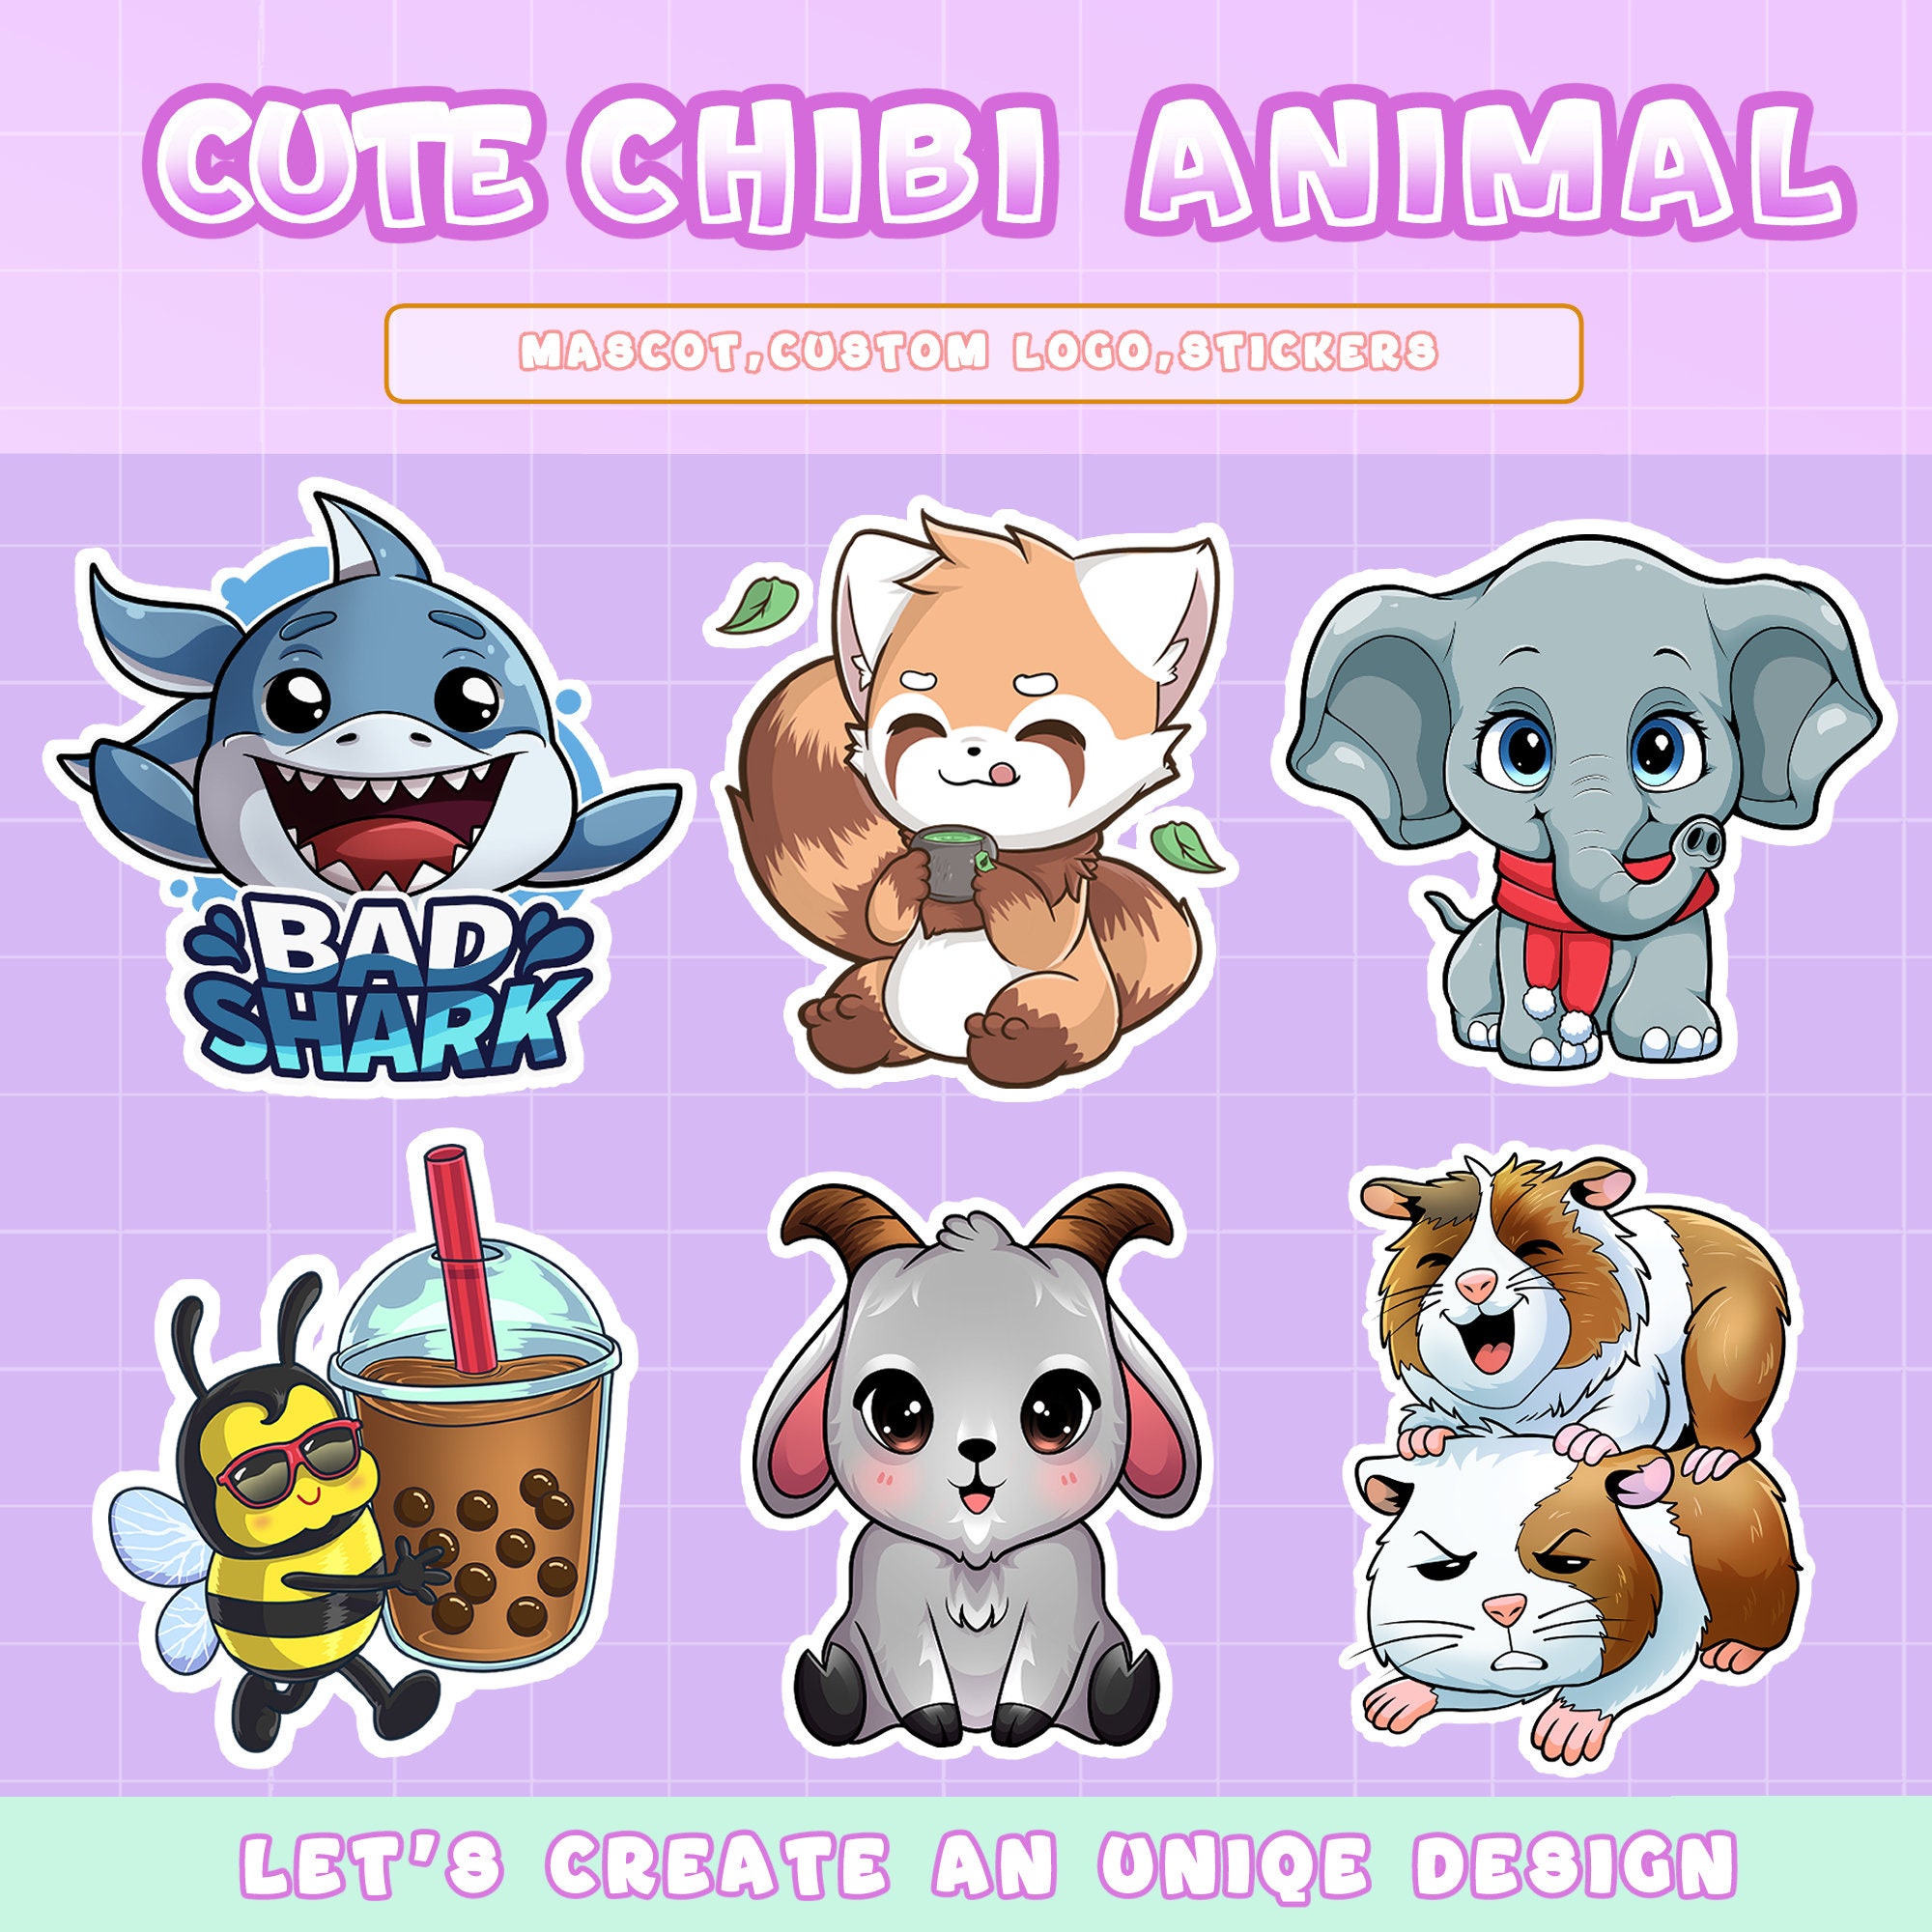 Cute Animal Sticker Pack qty 8 Cute Stickers for Animal Lovers Assorted  Chibi Animals Waterproof Scatch/scuff Resistant Sticker Pack 